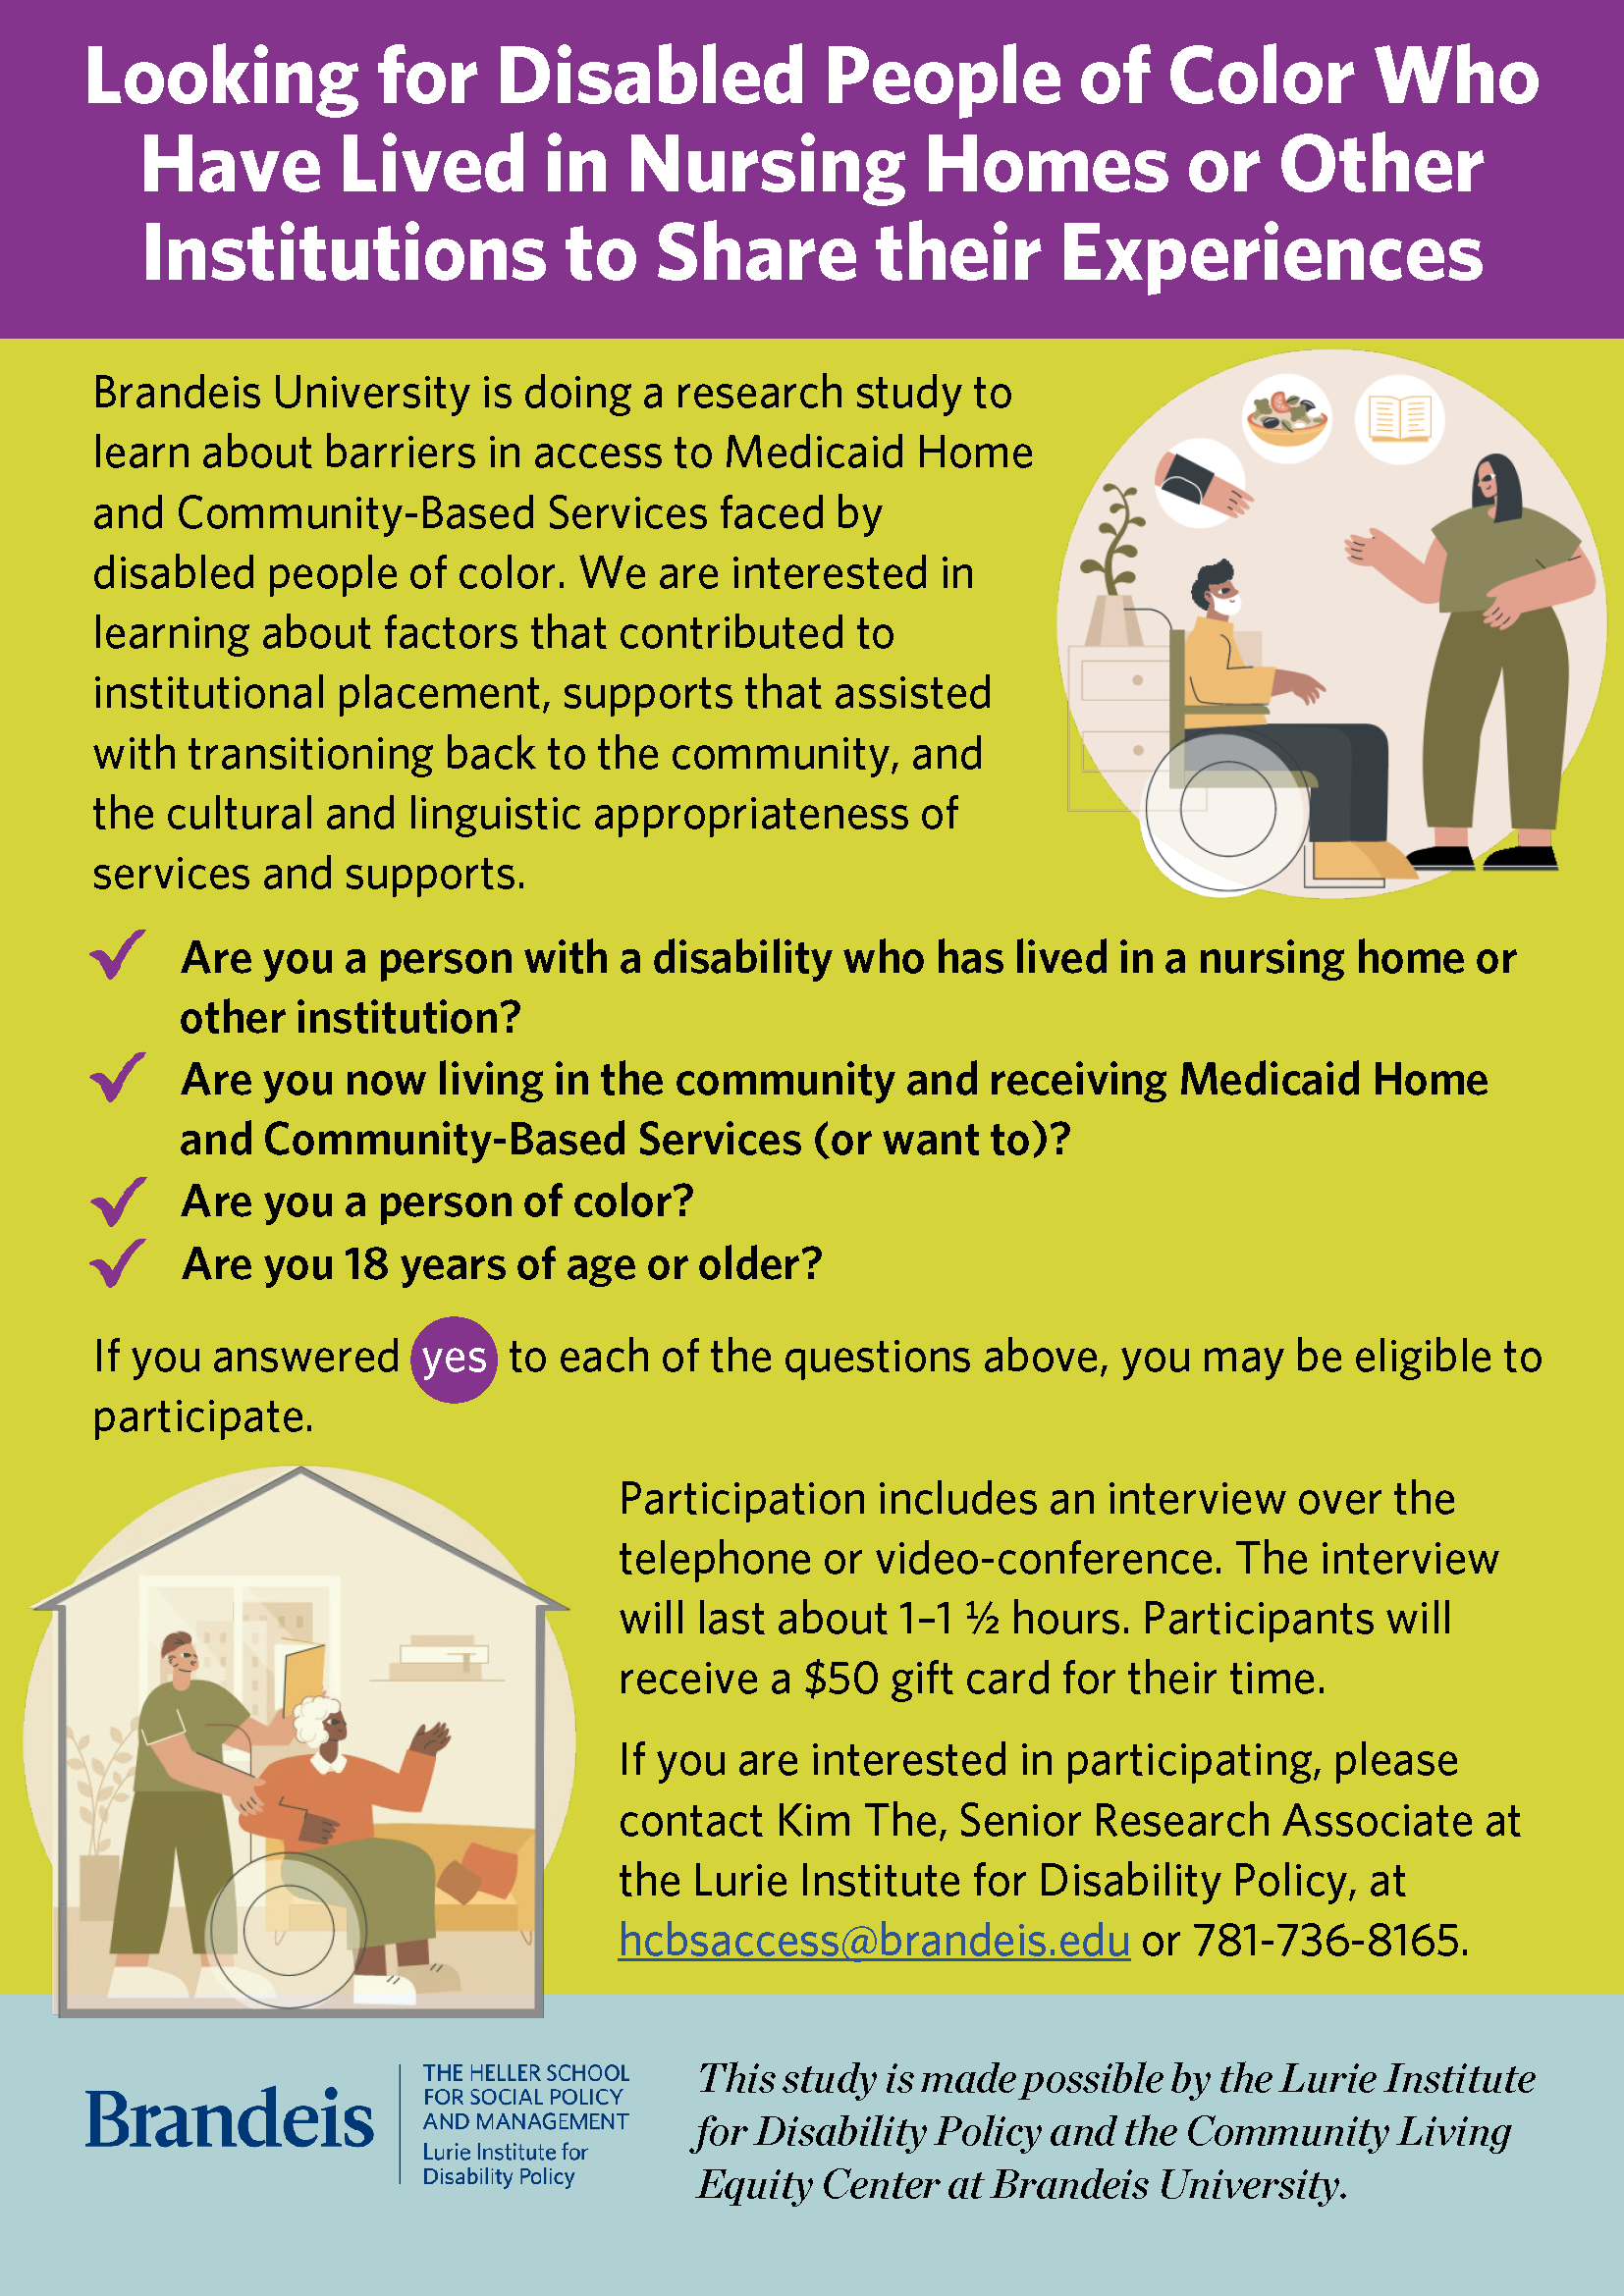 Looking for Disabled People of Color Who Have Lived in Nursing Homes or Other Institutions to Share their Experiences